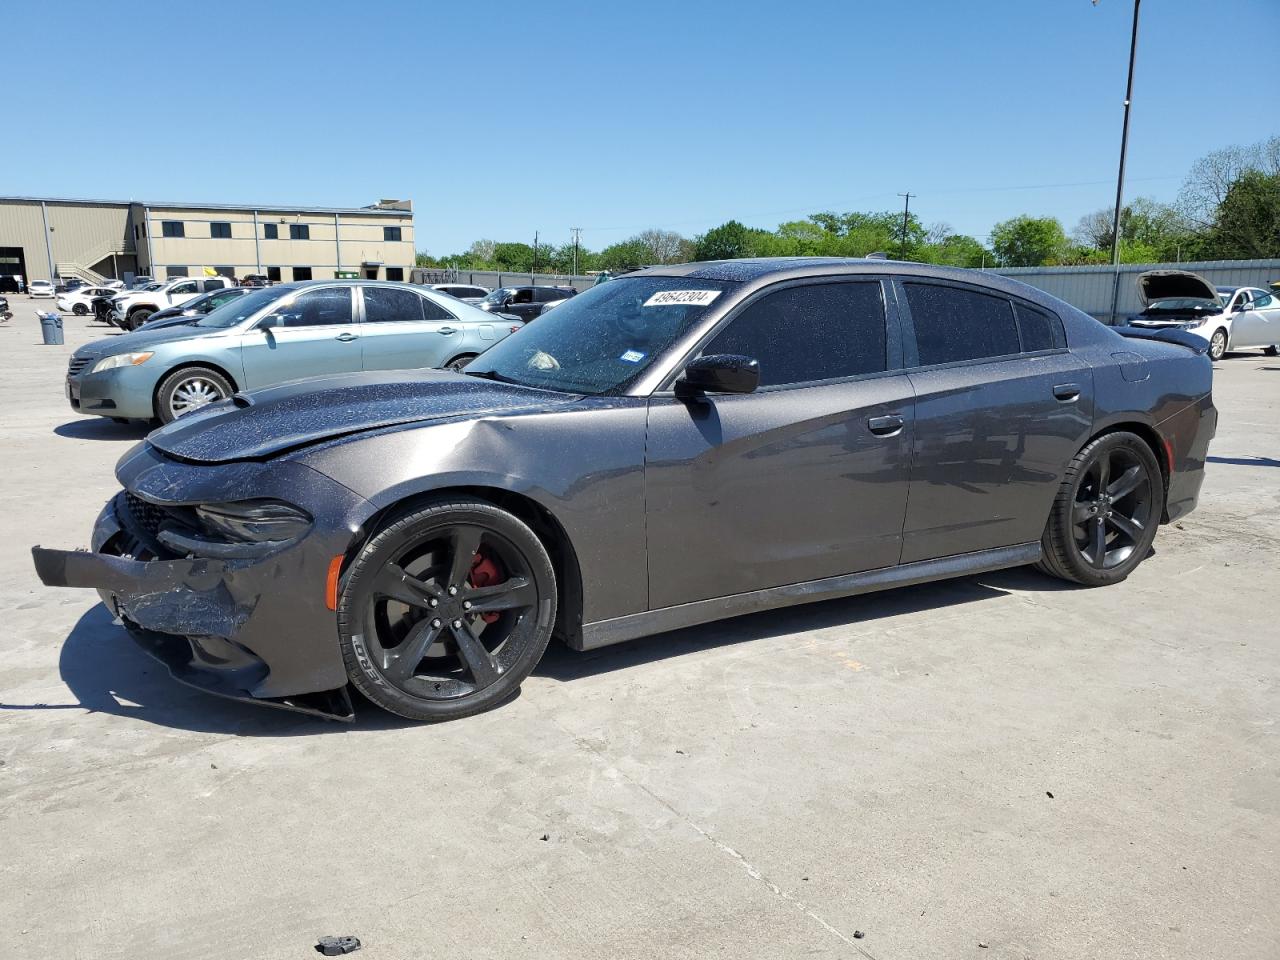 vin: 2C3CDXCT7KH643352 2C3CDXCT7KH643352 2019 dodge charger 5700 for Sale in 75172 1528, Tx - Dallas South, Wilmer, Texas, USA